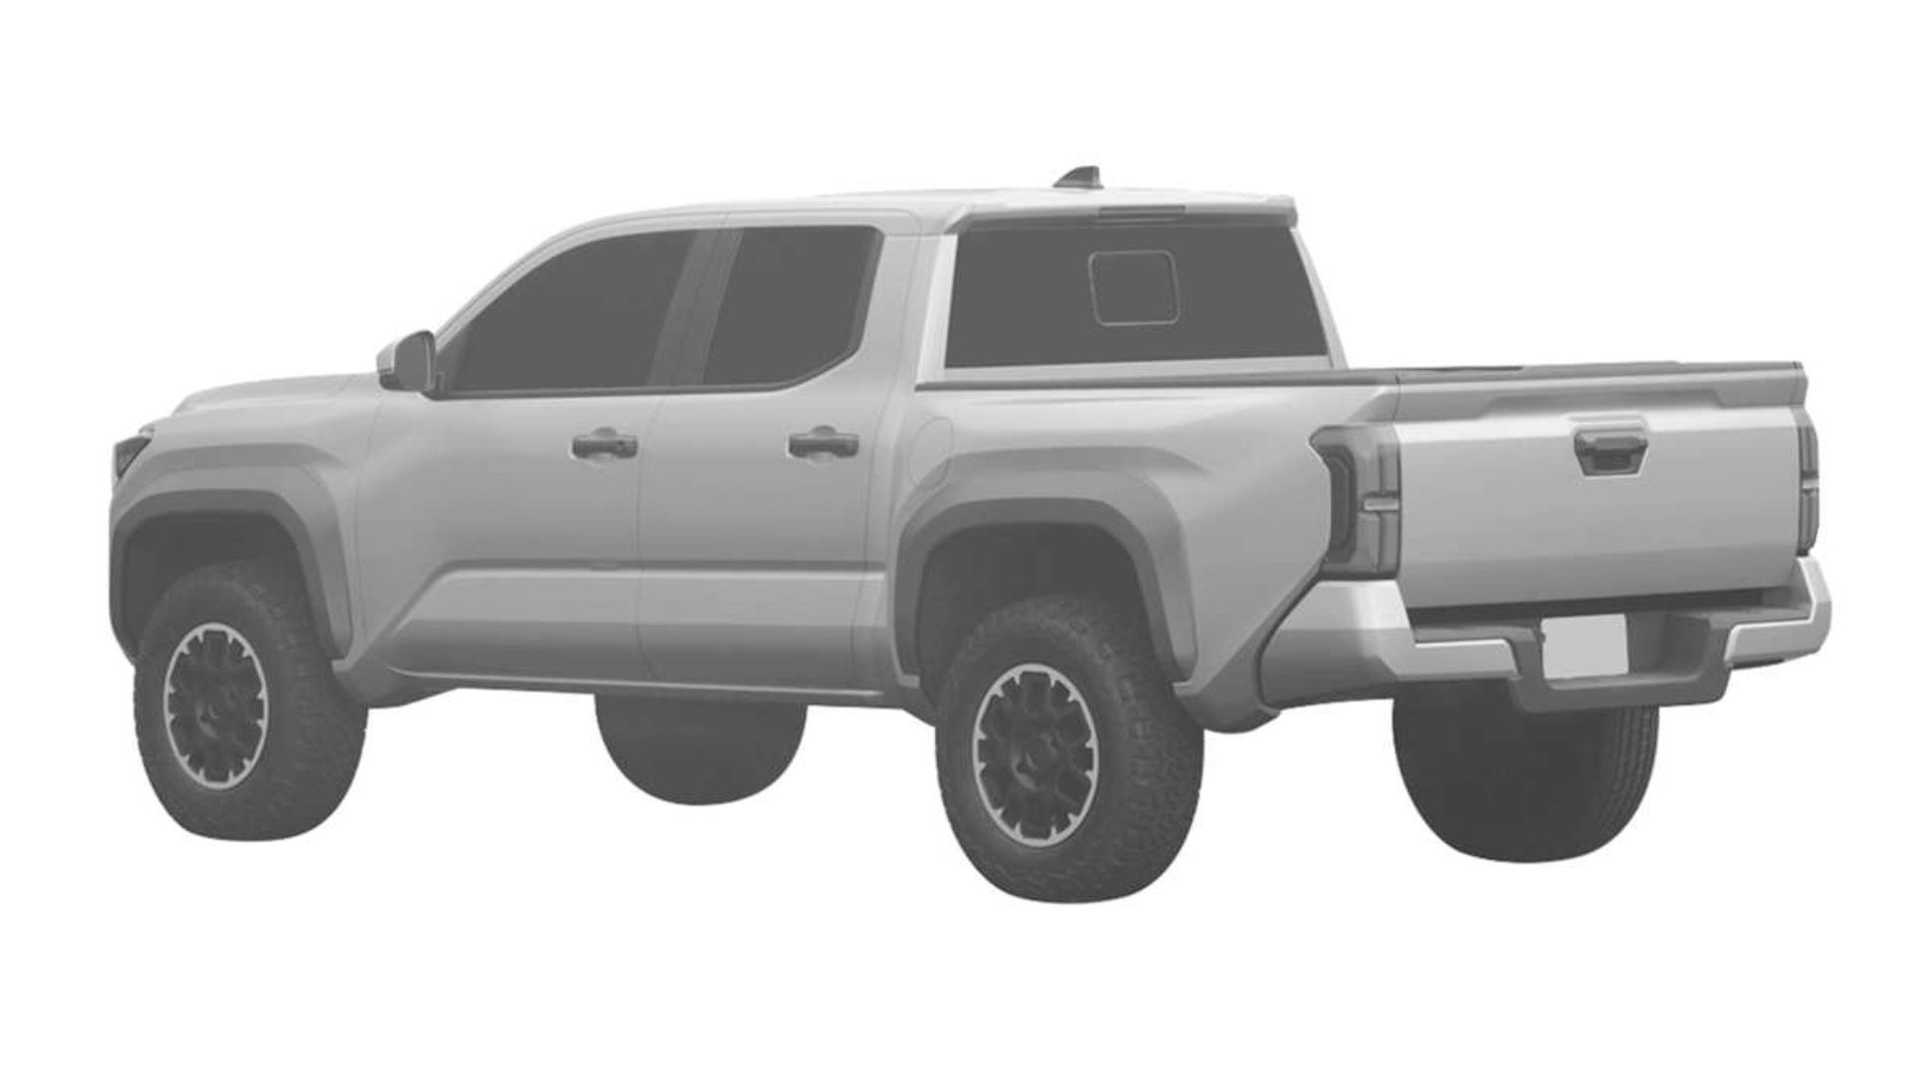 This Is What We Can Expect From Toyota's 2024 Pickup Truck